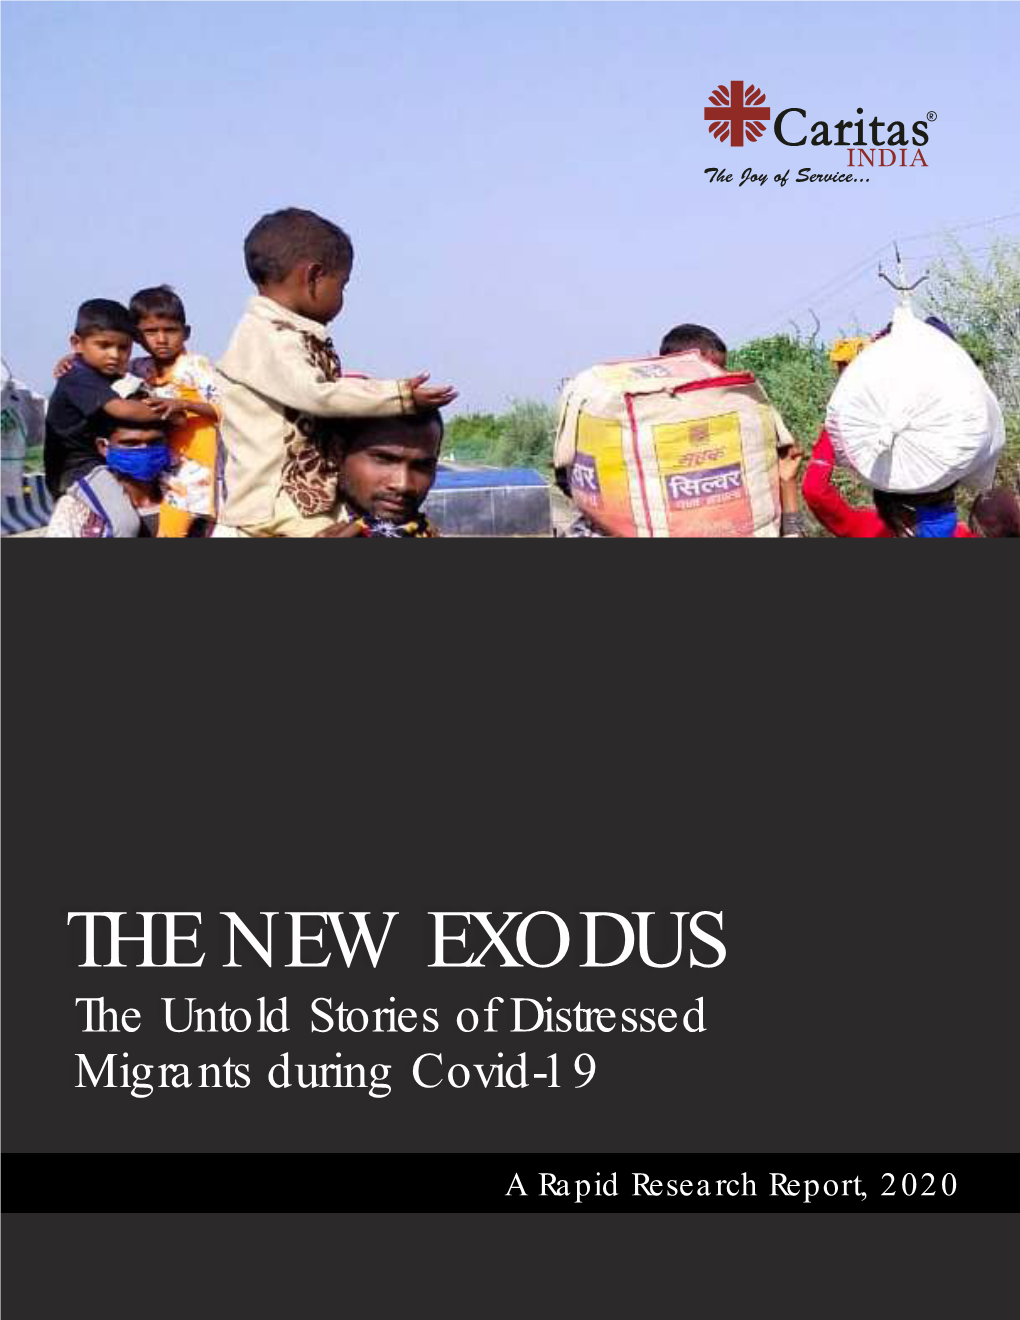 The New Exodus – the Untold Stories of Distressed Migrants During Covid-19